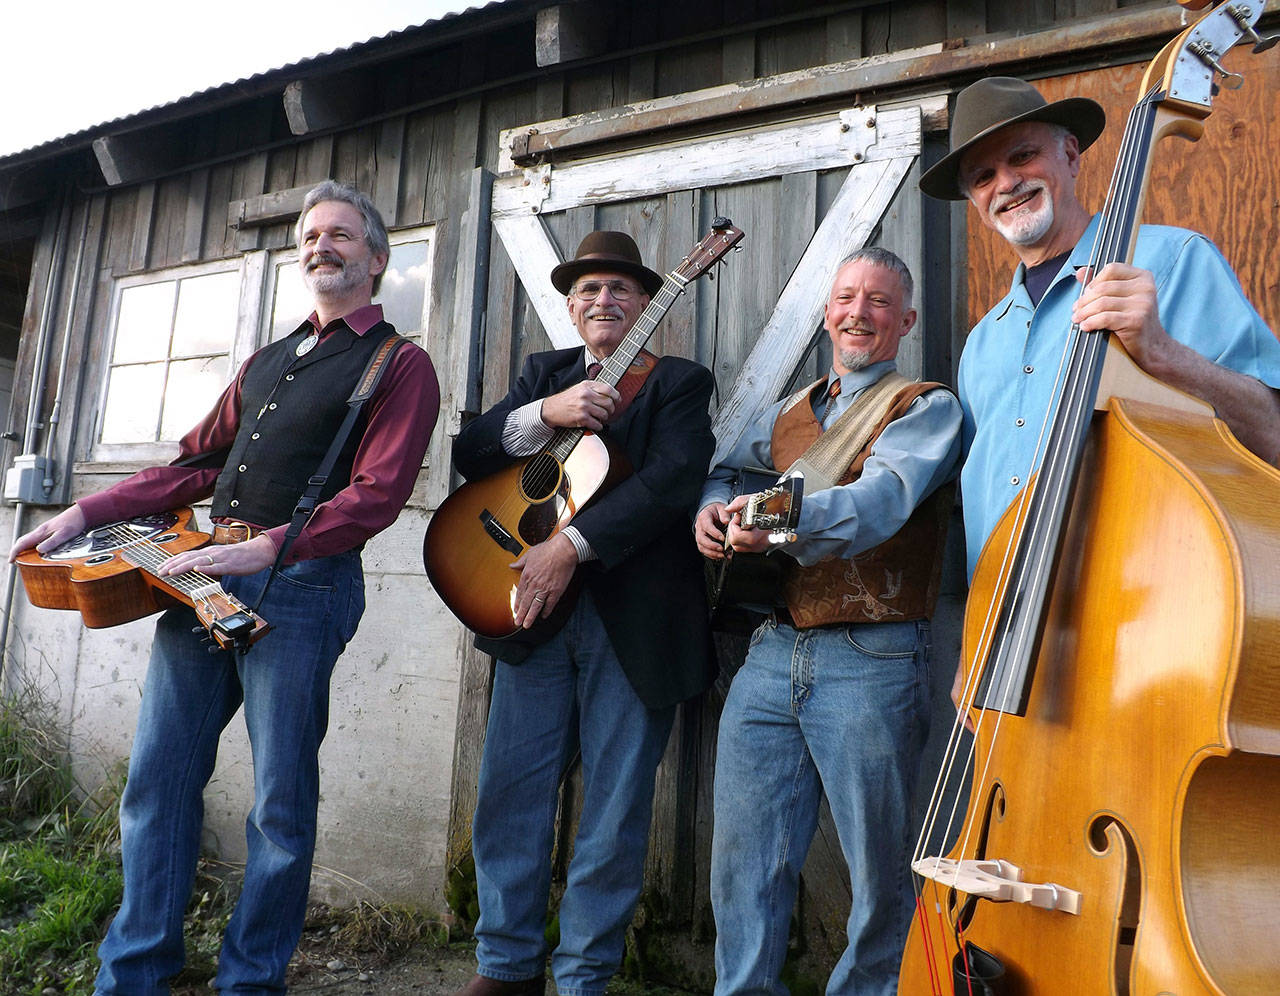 FarmStrong is part of the Red, White and Bluegrass celebration of local food and music at Finnriver Farm & Cidery this weekend. From left are Rick Meade, Jim Faddis, Cort Armstrong and John Pyles. (Kia Armstrong)